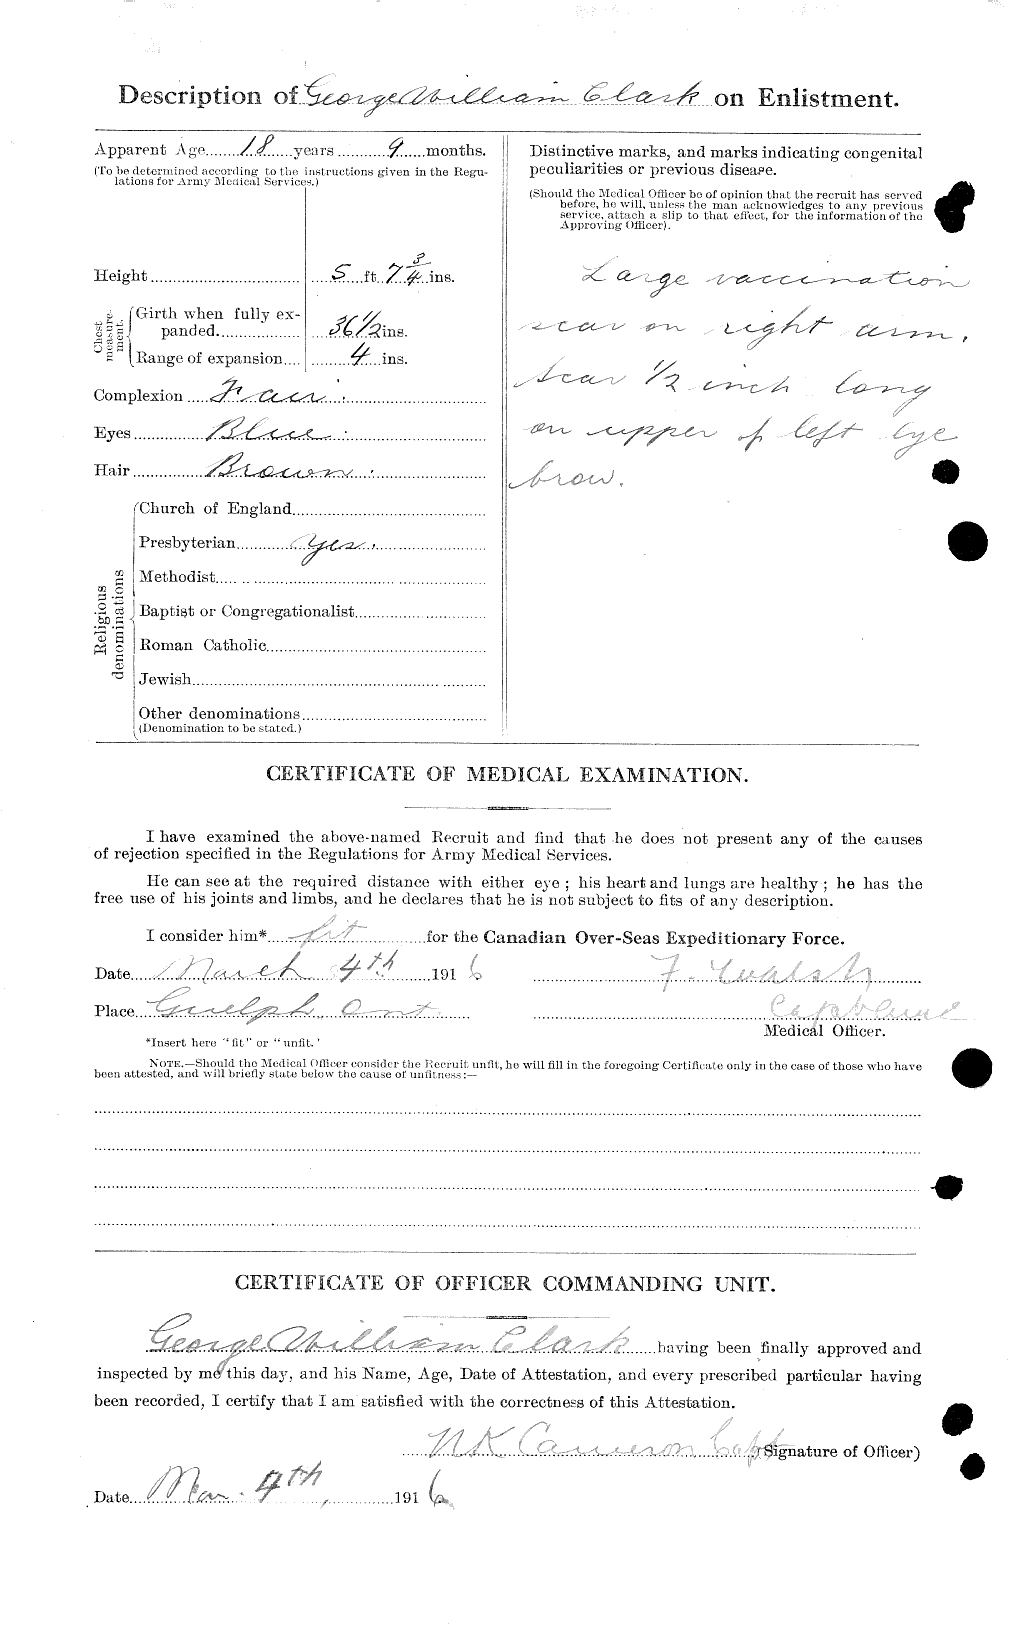 Personnel Records of the First World War - CEF 023209b